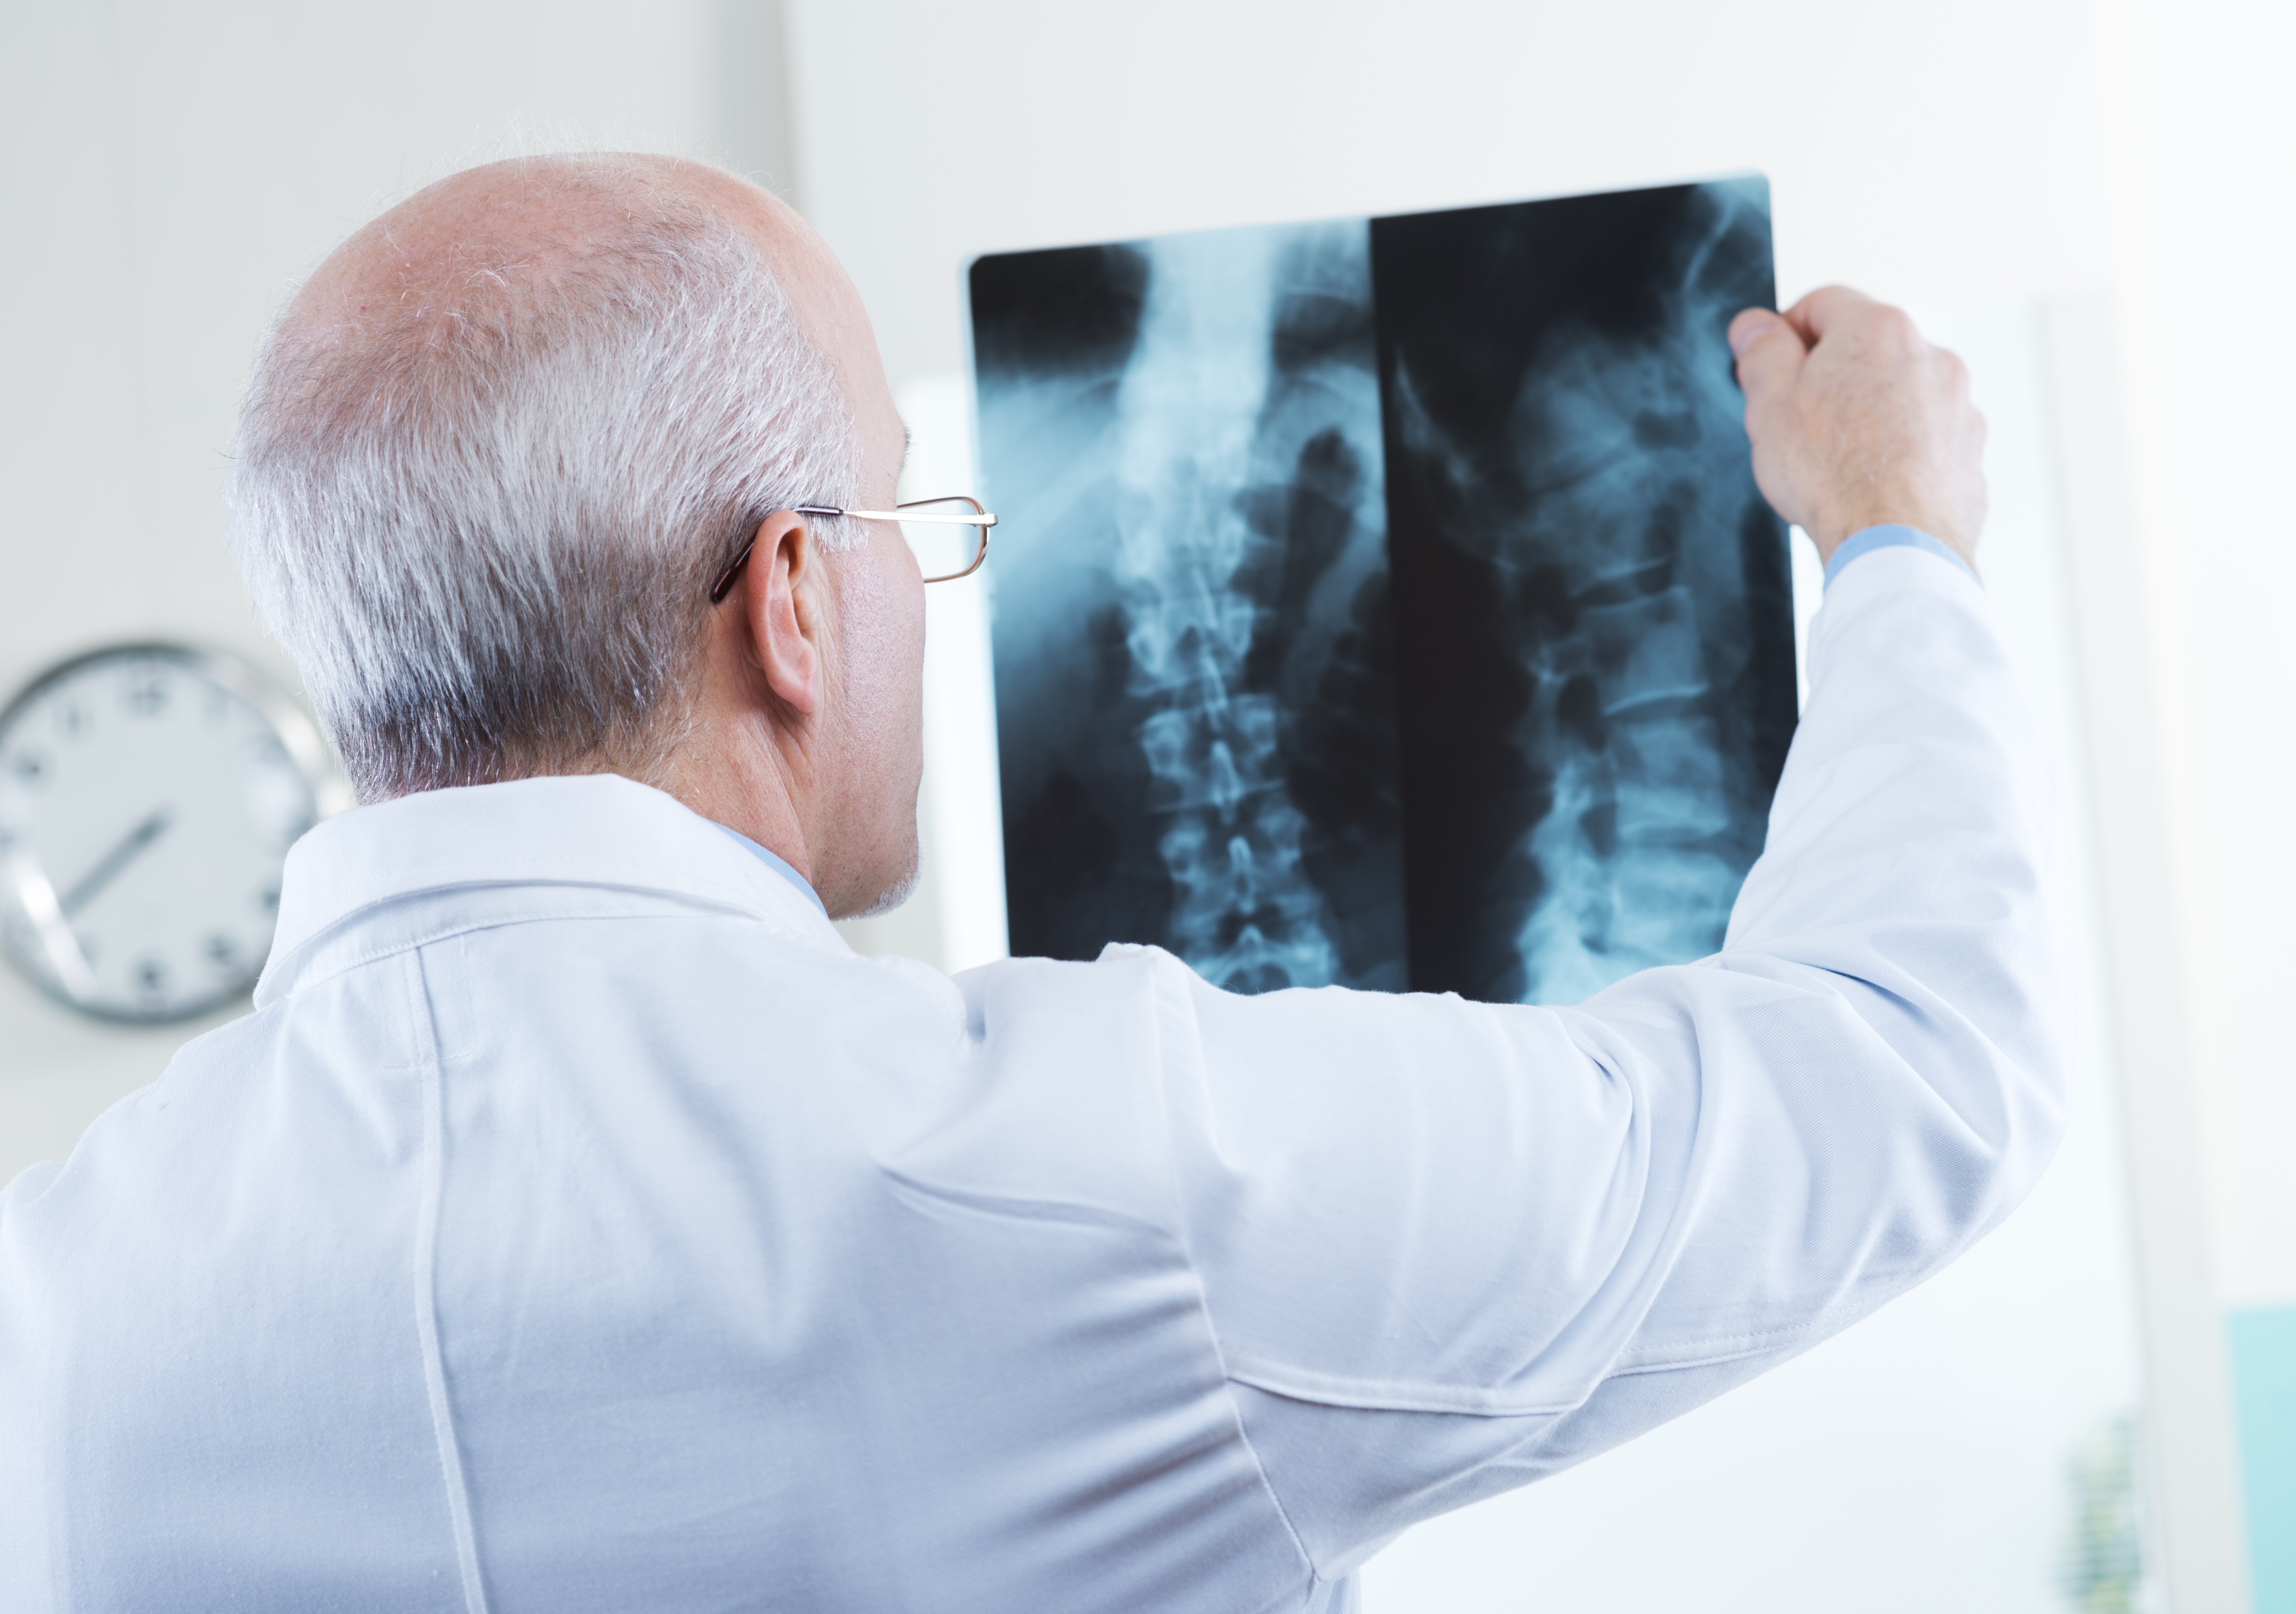 ZimVie begets Highridge Medical with completed spine business spinout